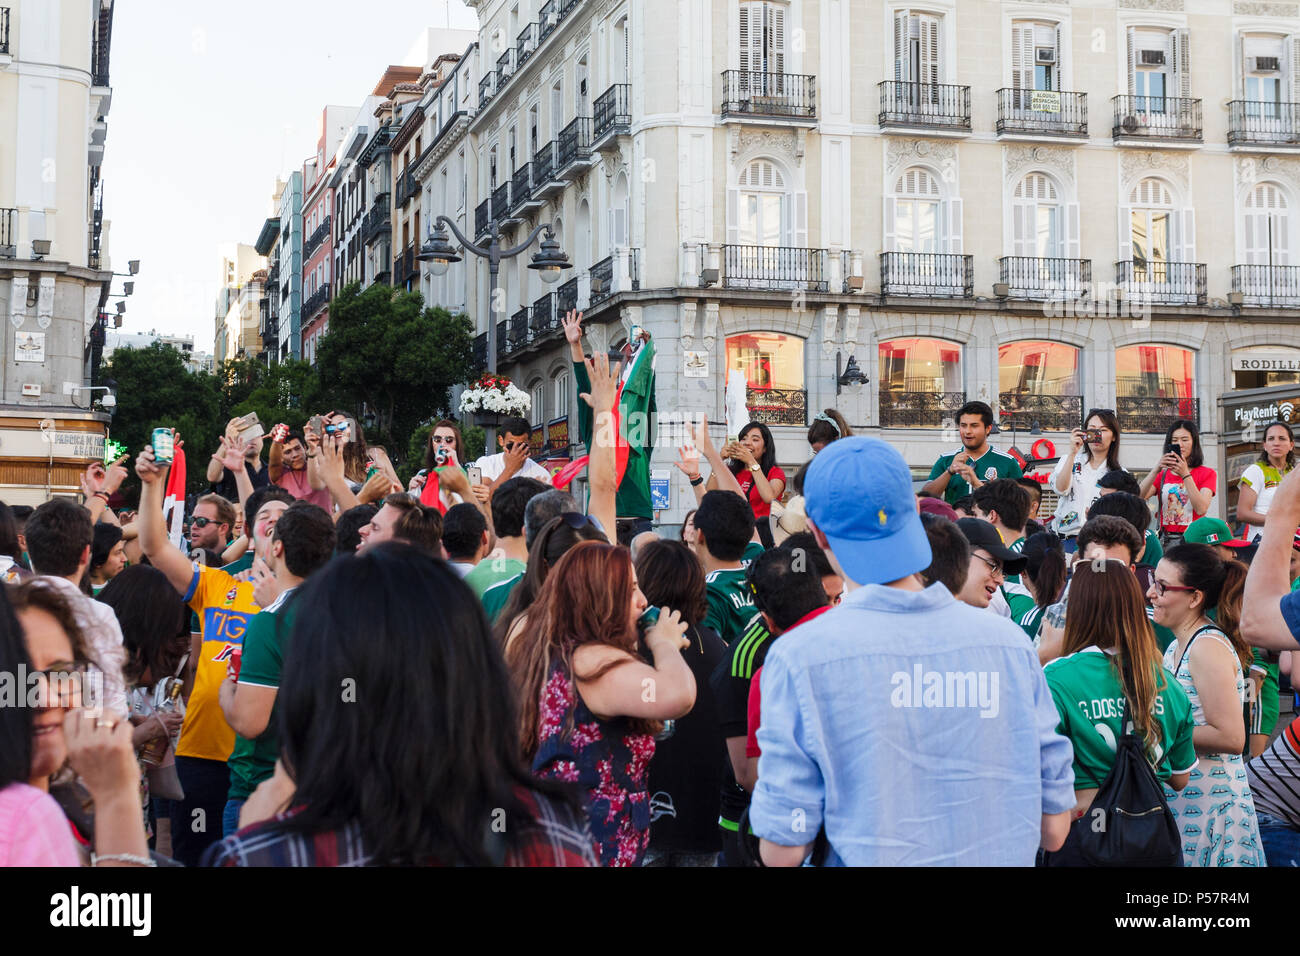 Madrid, Spain - June 17 2018: Mexican football fans celebrating 1:0 victory over Germany on Plaza Del Sol Stock Photo